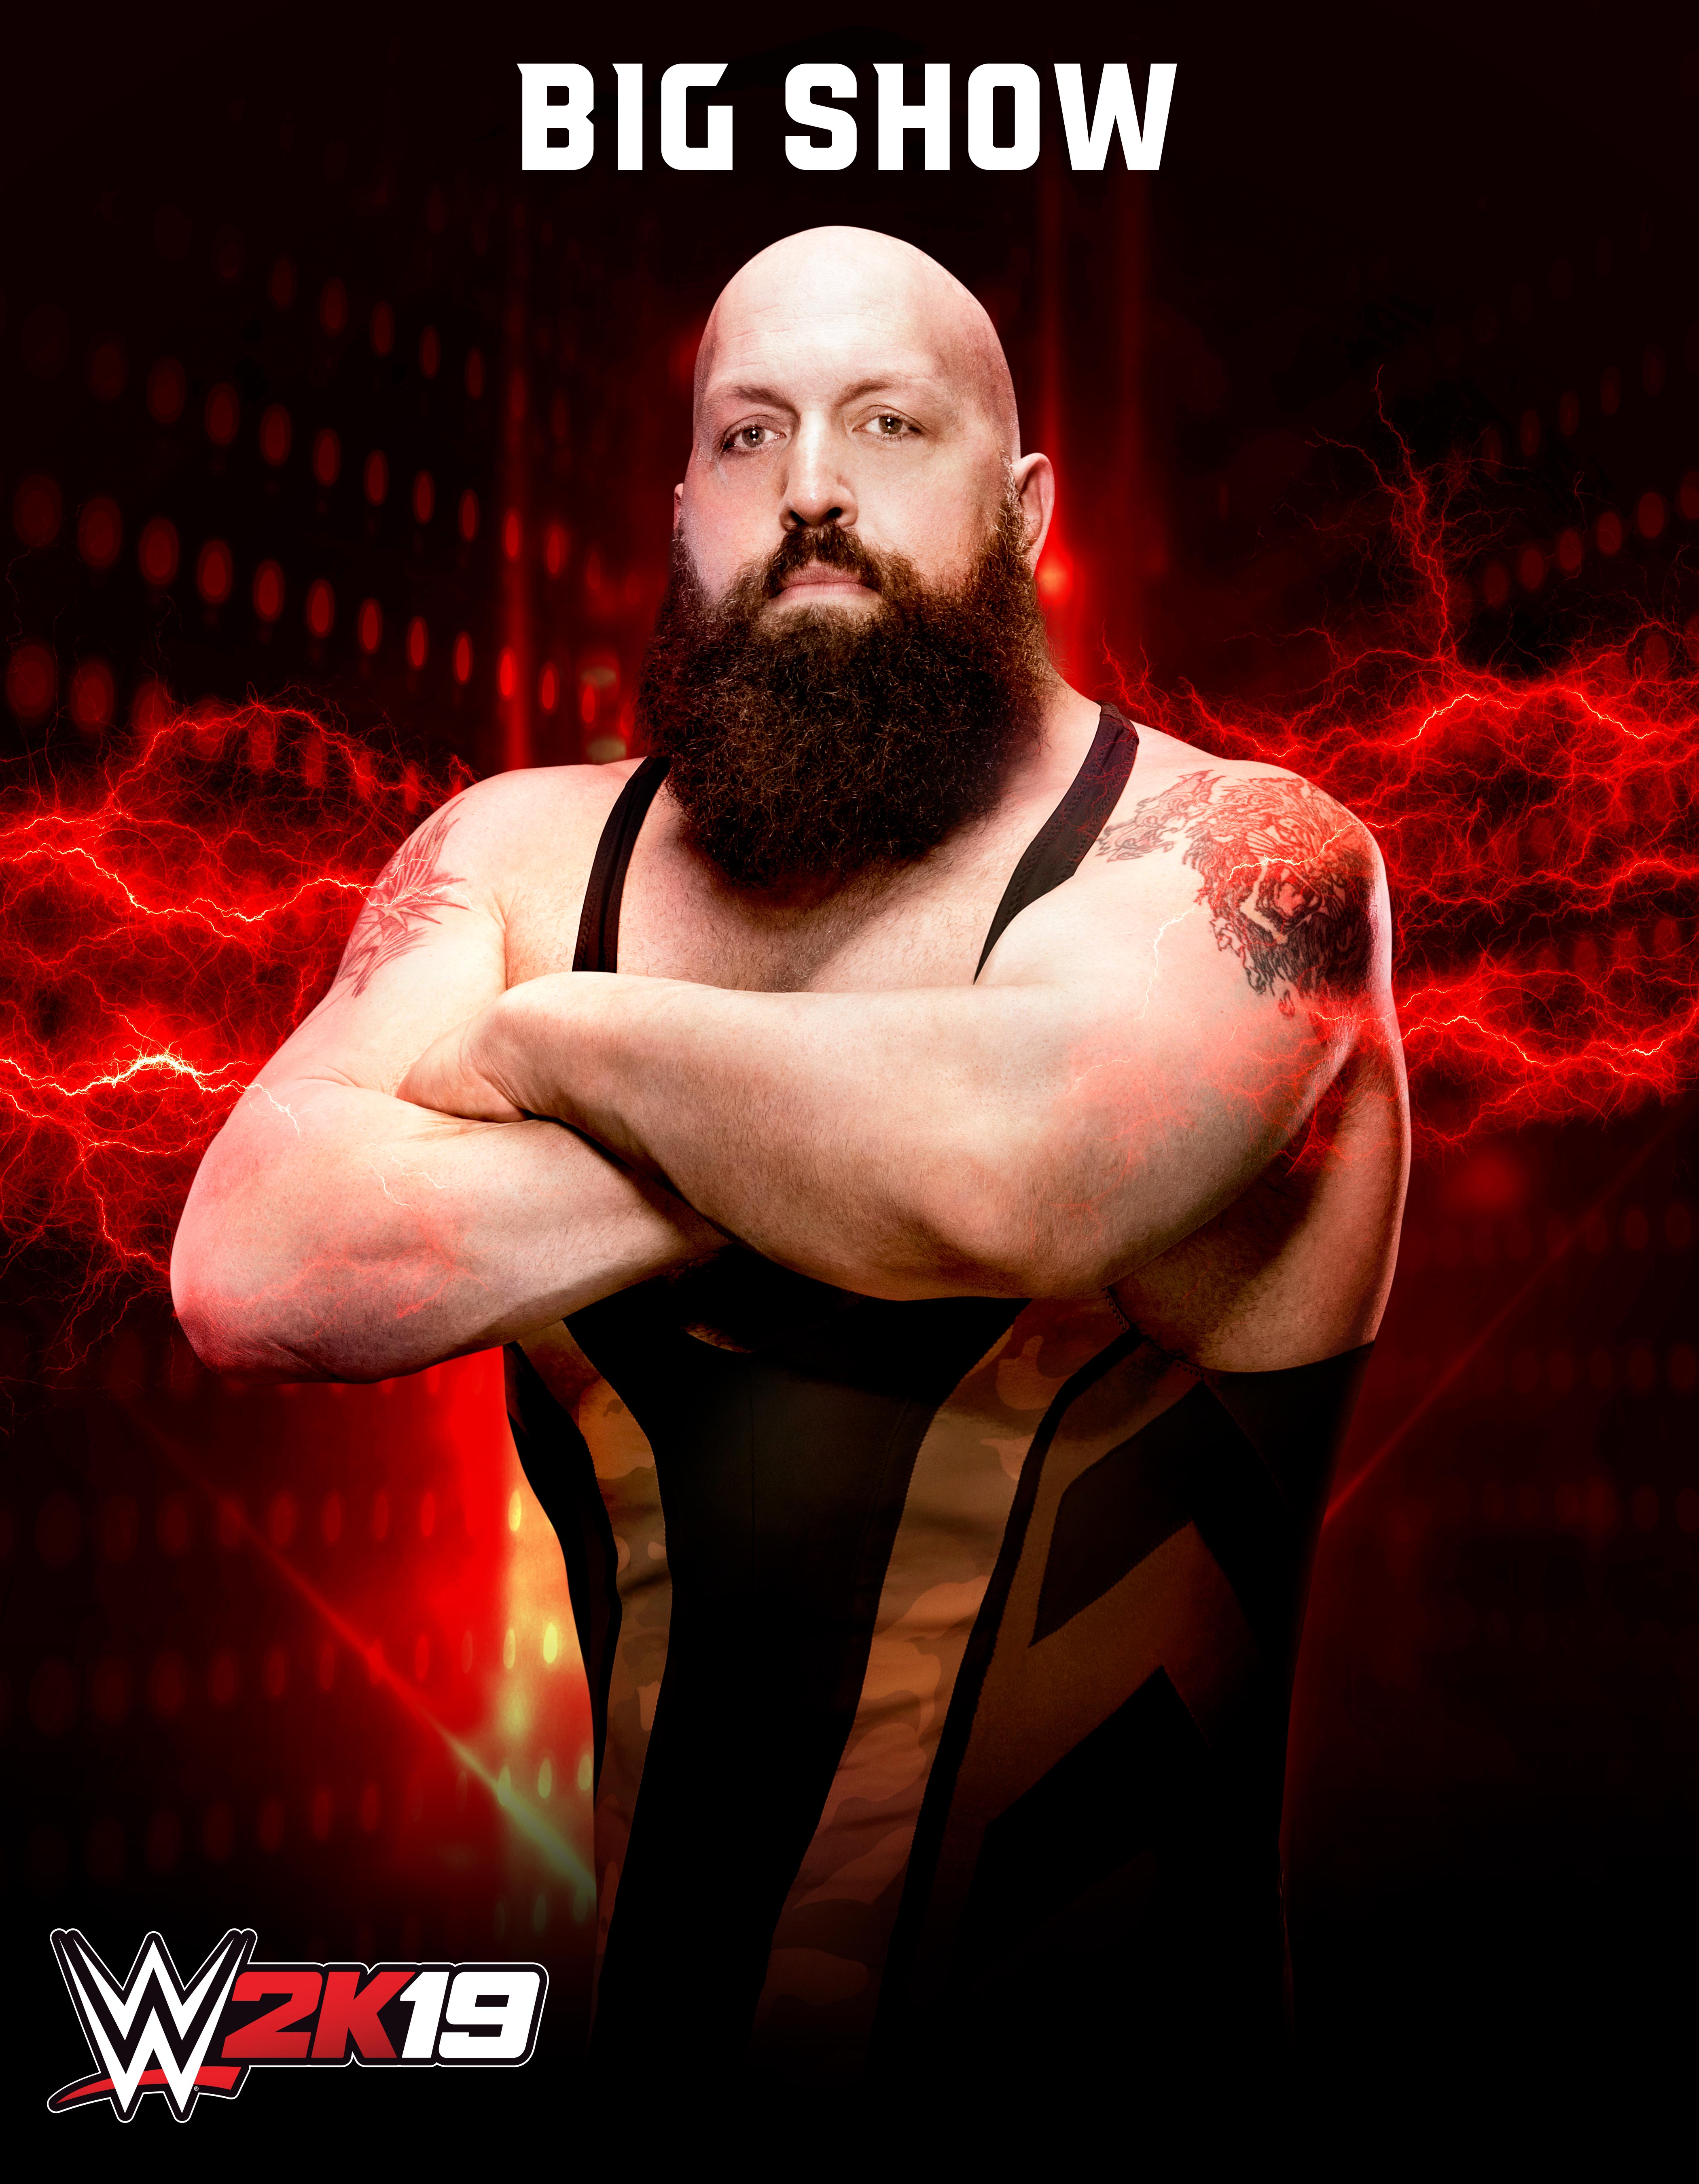 Wwe2k19 Roster Big Show